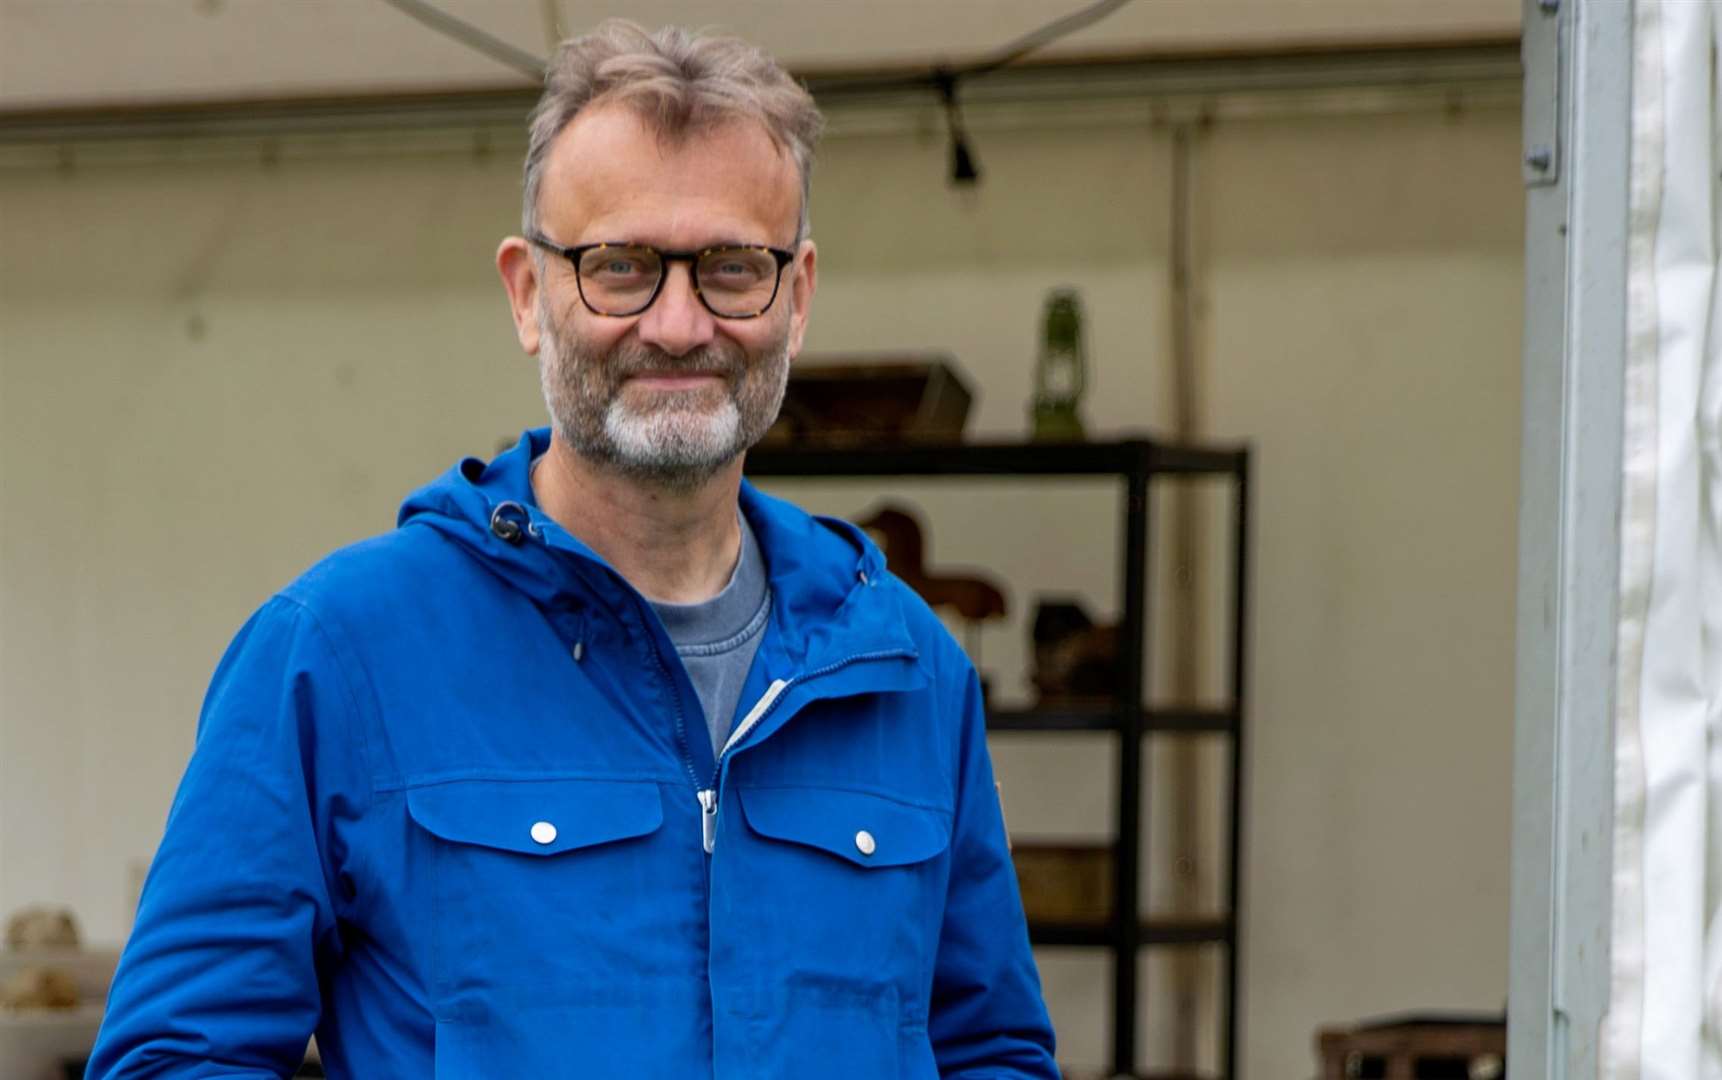 Hugh Dennis is known for appearing in shows such as Outnumbered, Mock the Week and Not Going Out